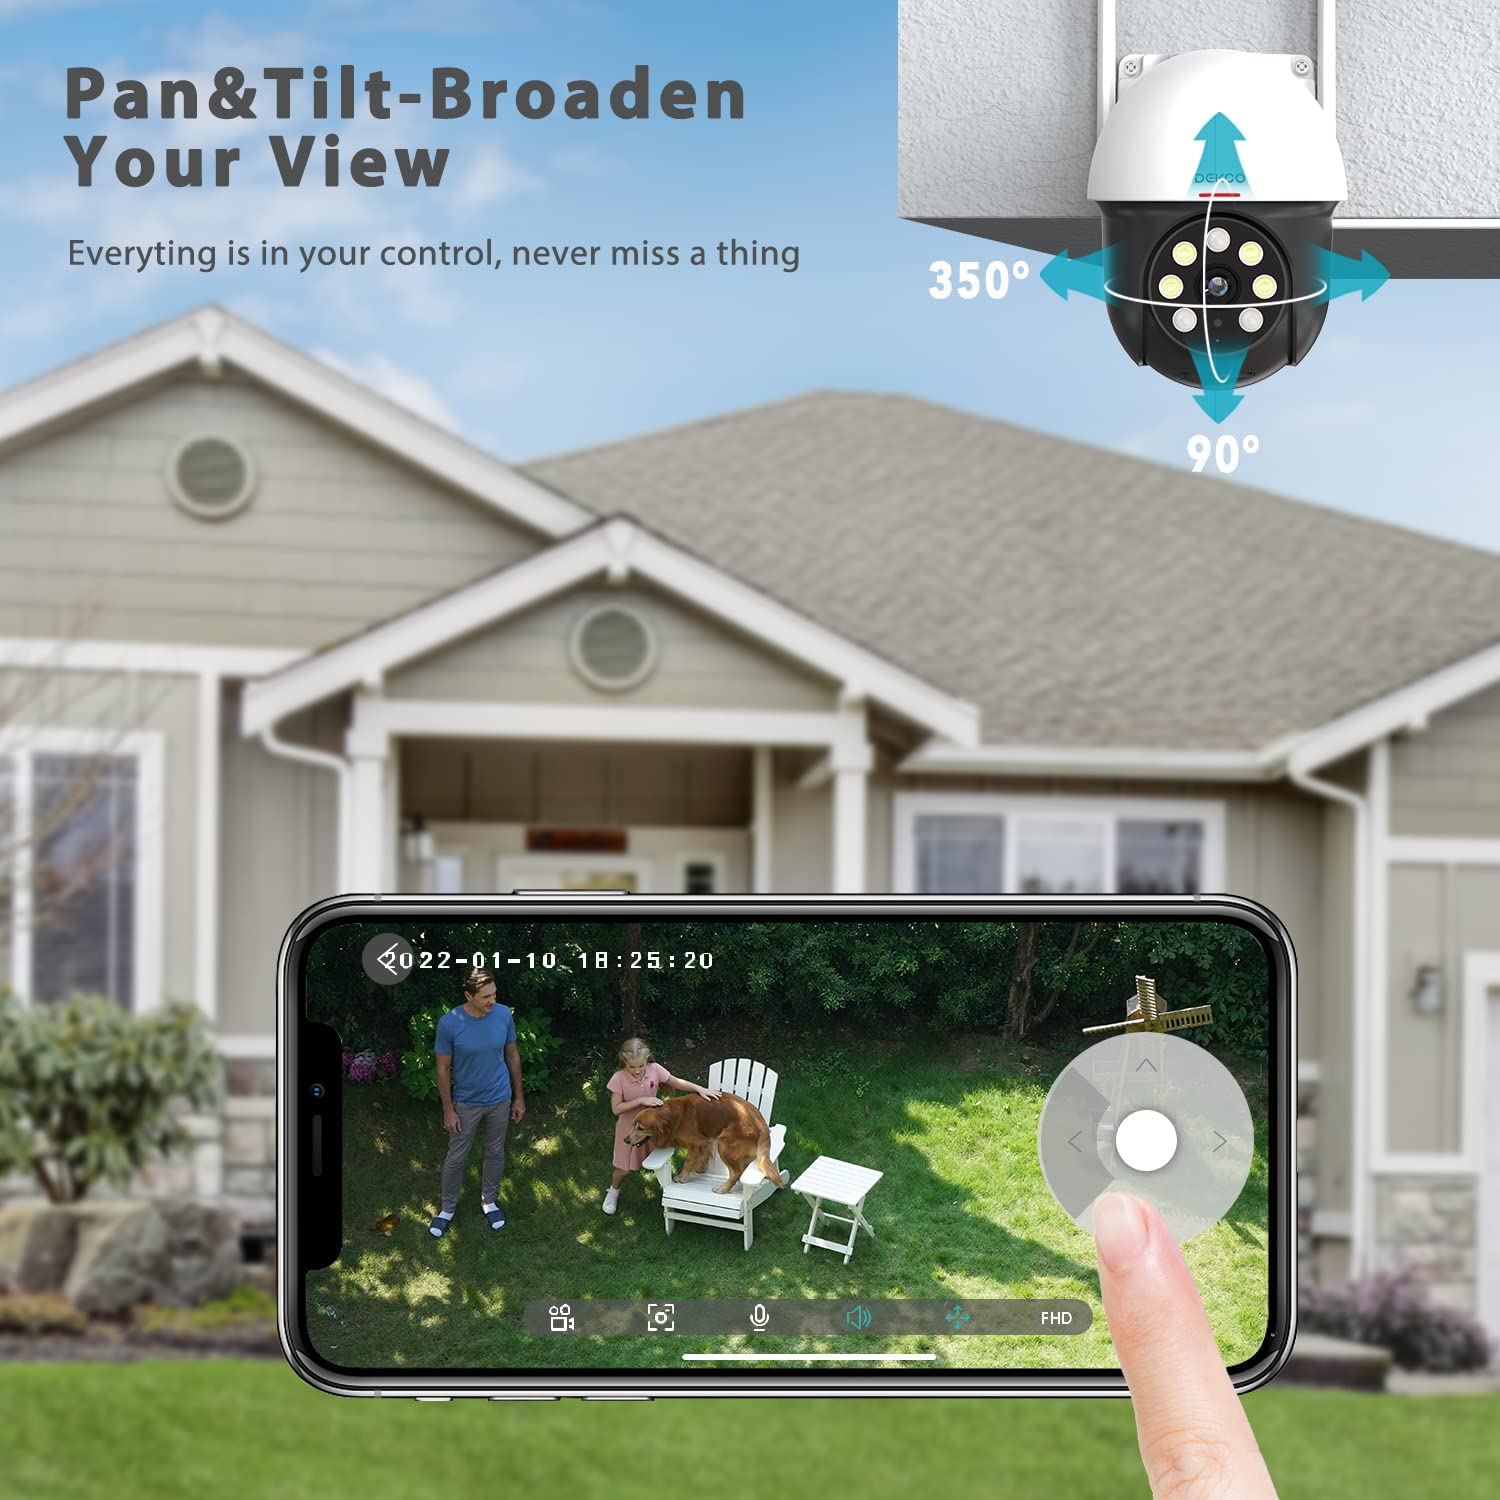 2K Security Camera Outdoor, Pan & Tilt 360° View with Motion Detection Auto Tracking Smart Alerts, 2-Way Audio, IP66 Weatherproof